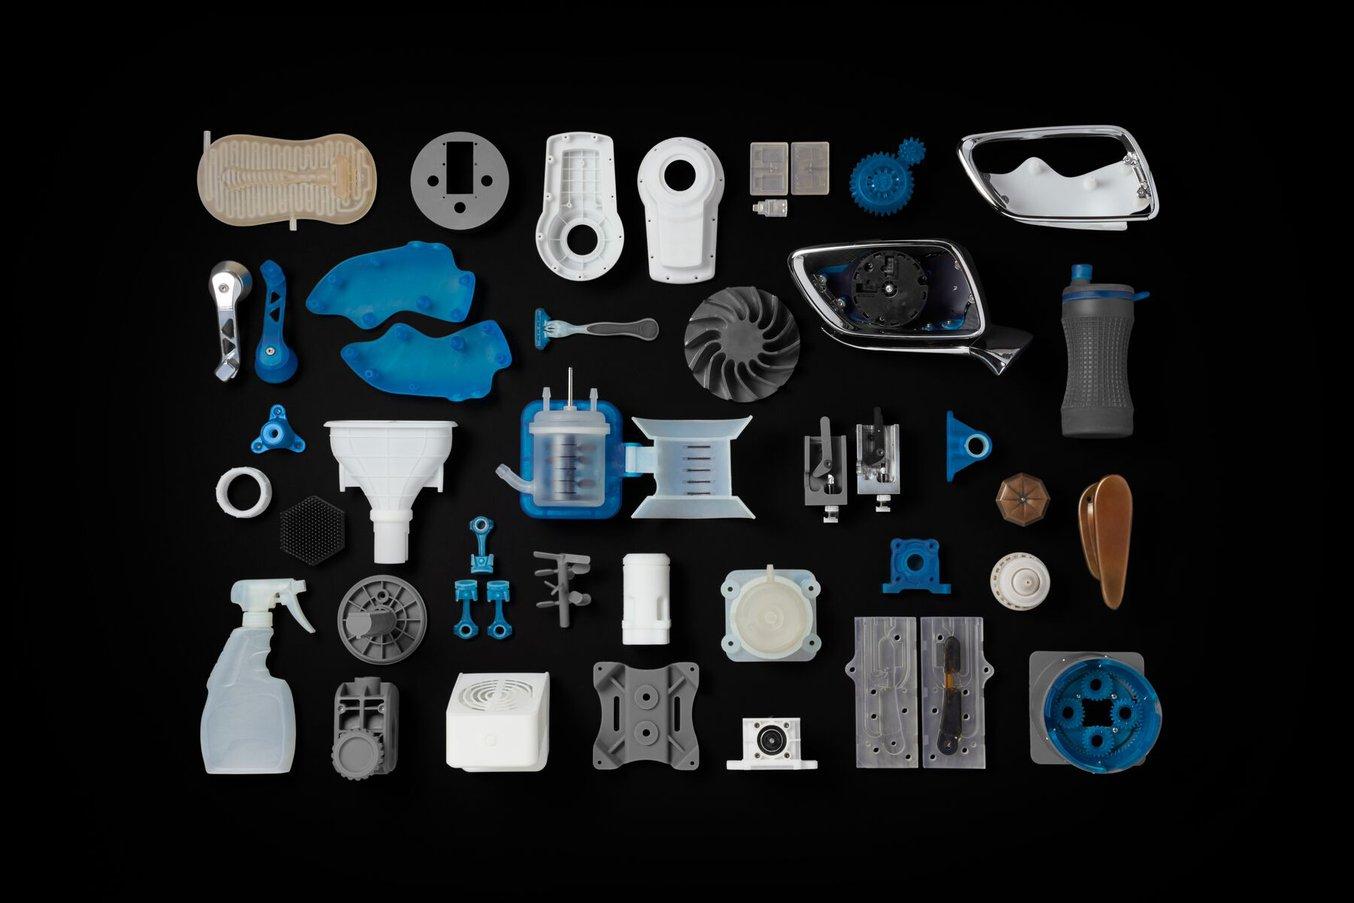 SLA 3D printed prototypes in a wide range of materials